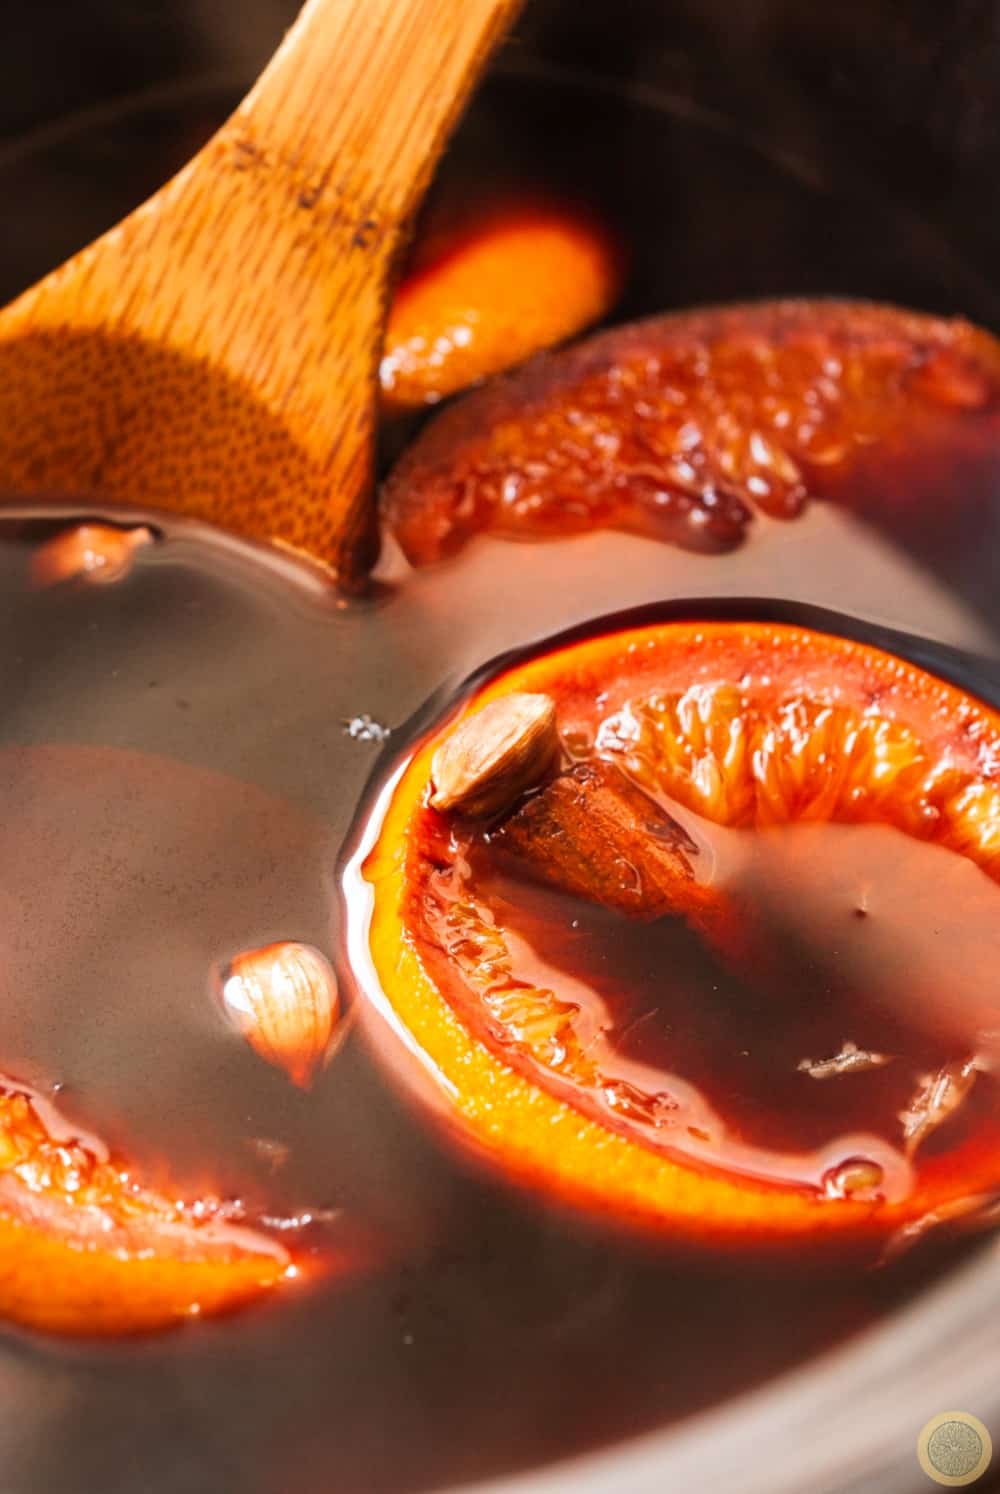 Mulled wine Stove top instructions: